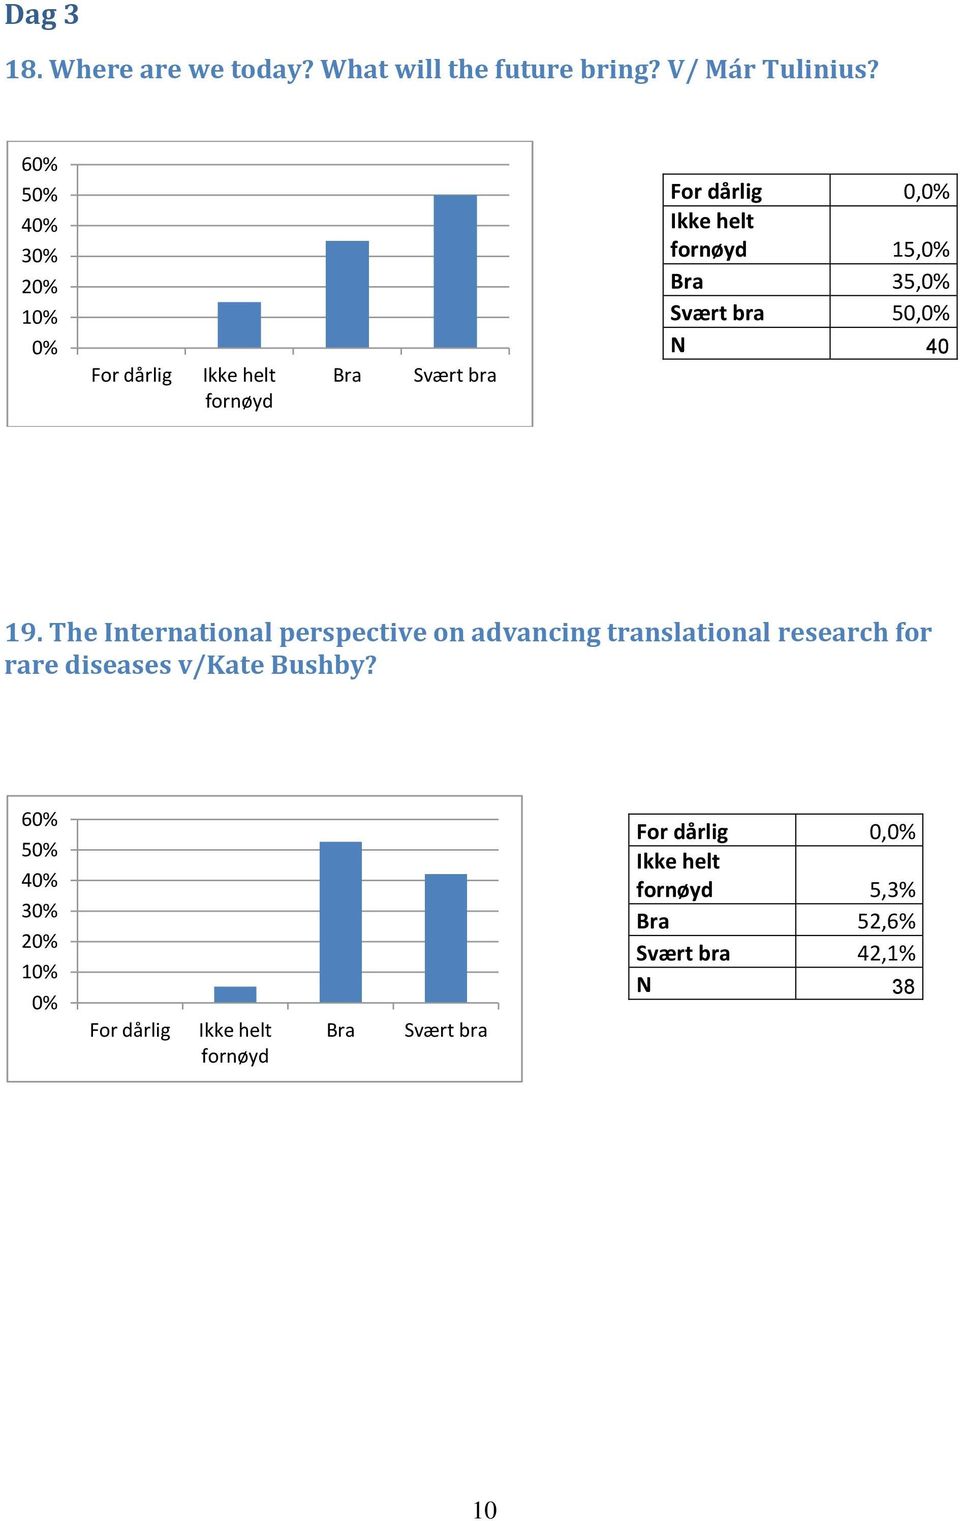 The International perspective on advancing translational